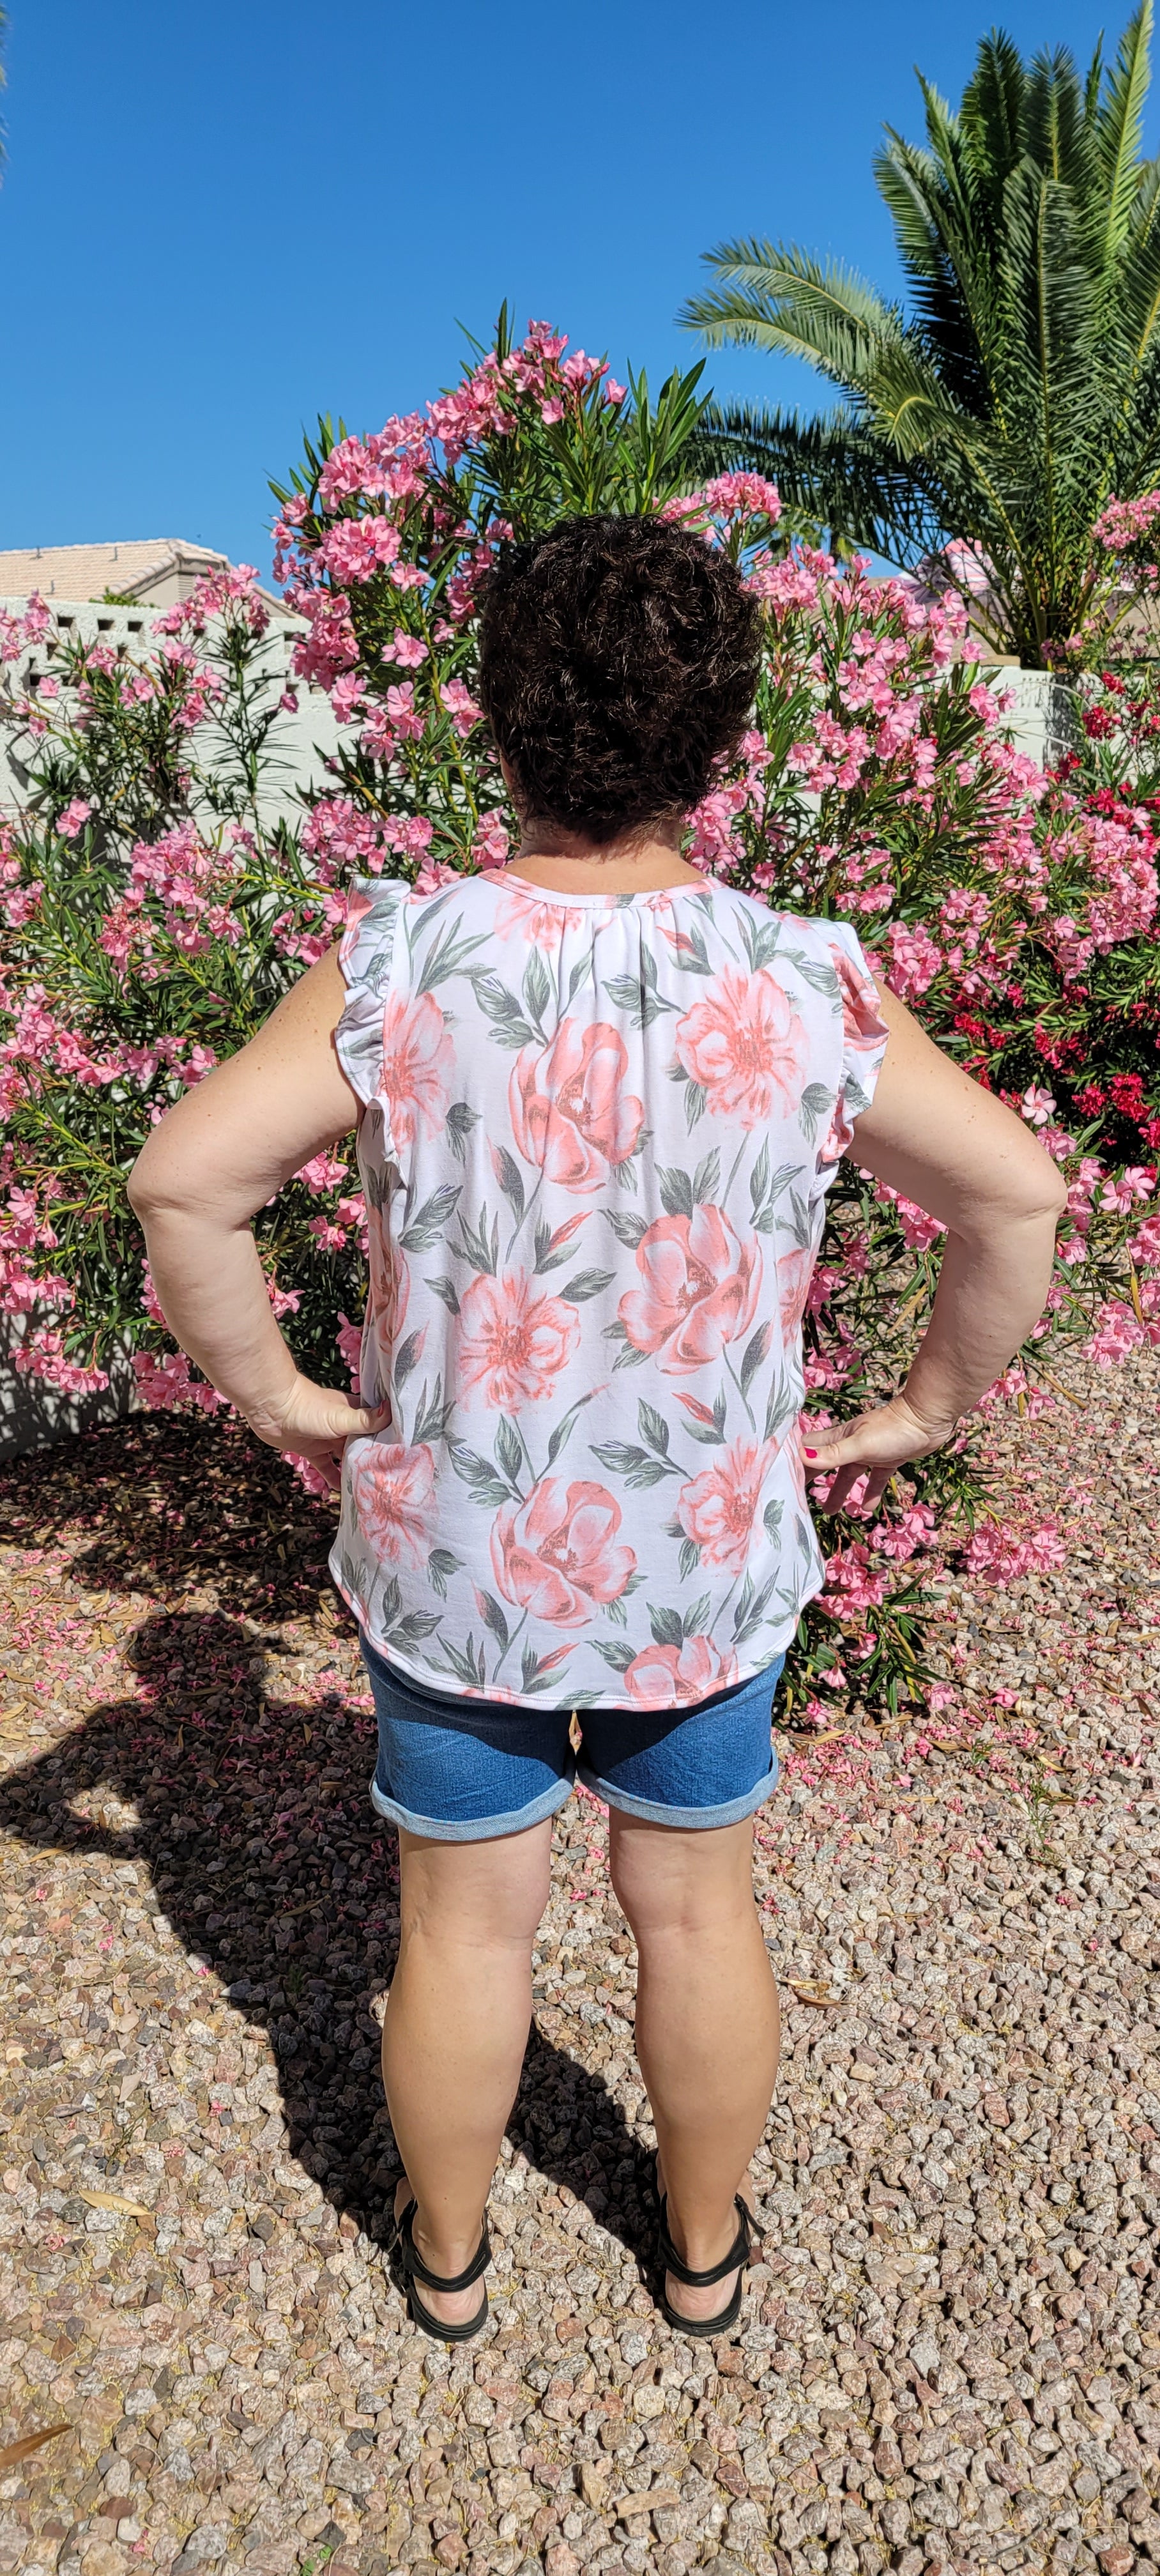 “Garden Goddess” is a comfy and casual top! This sleeveless white shirt features a beautiful pink and sage floral print. It is a baby doll top with rounded neckline, ruffled details on sleeves and chest. This top is so soft and comfy! There is a terry cloth texture inside. Sizes small through large.